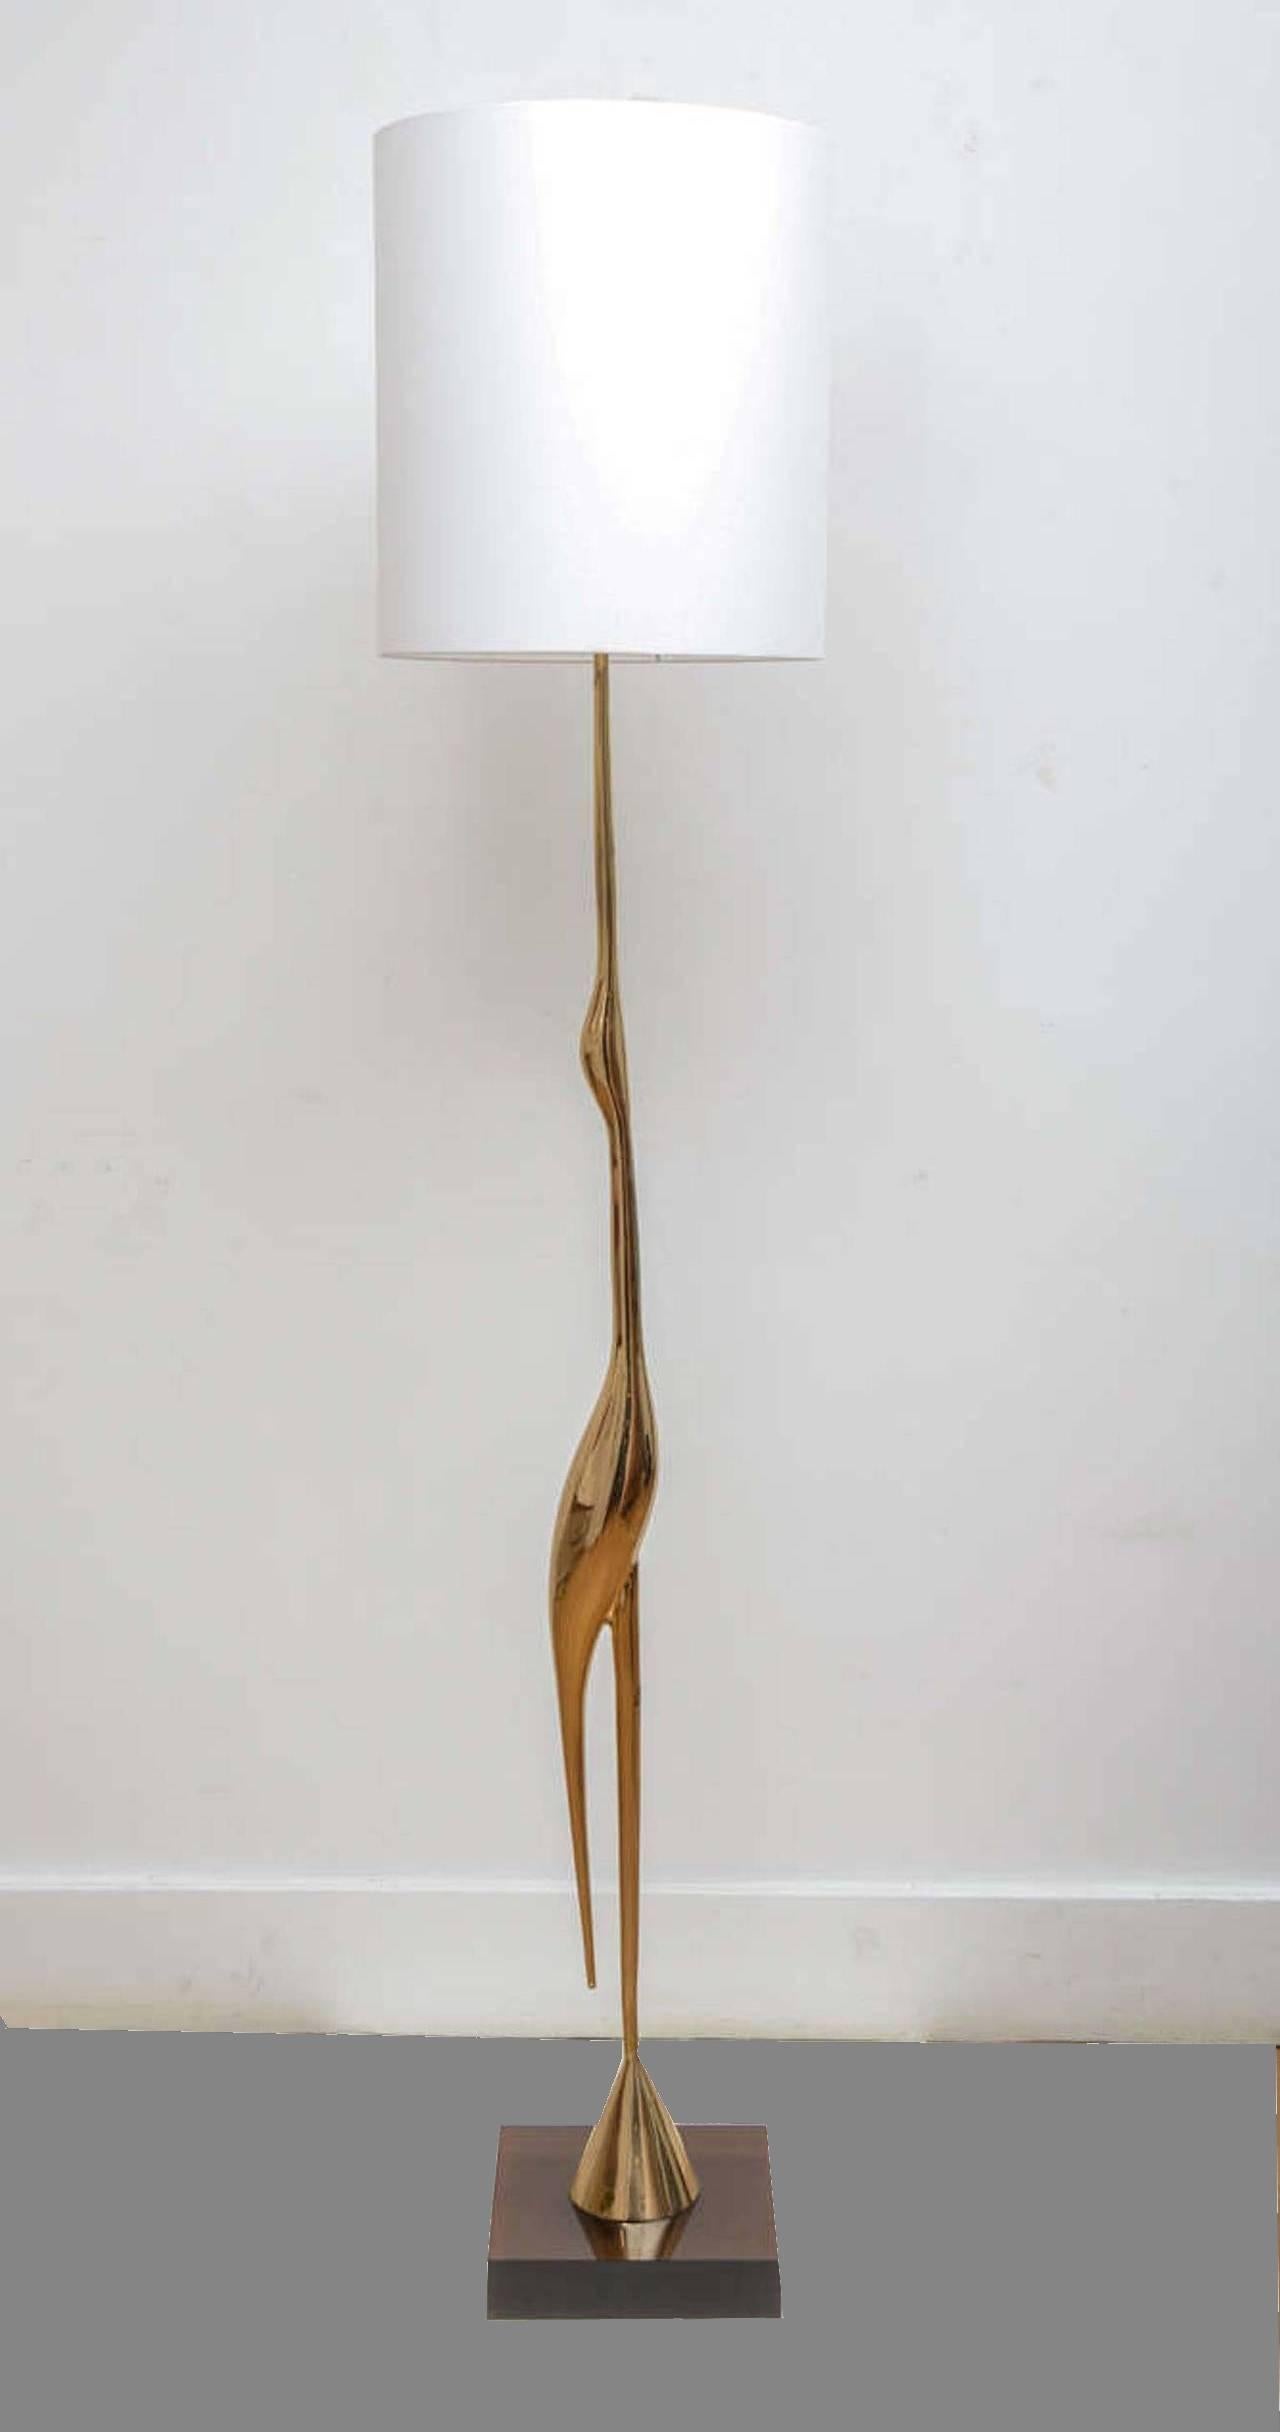 Polished bronze “He´ron” floor lamp, circa 1970, by René Broissand (born in 1928).
On a square brown Lucite base. Signed and numbered 14.
New lampshade redone as original.

Dimensions without lampshade are:
Height 171 cm.
Square base 30 x 30